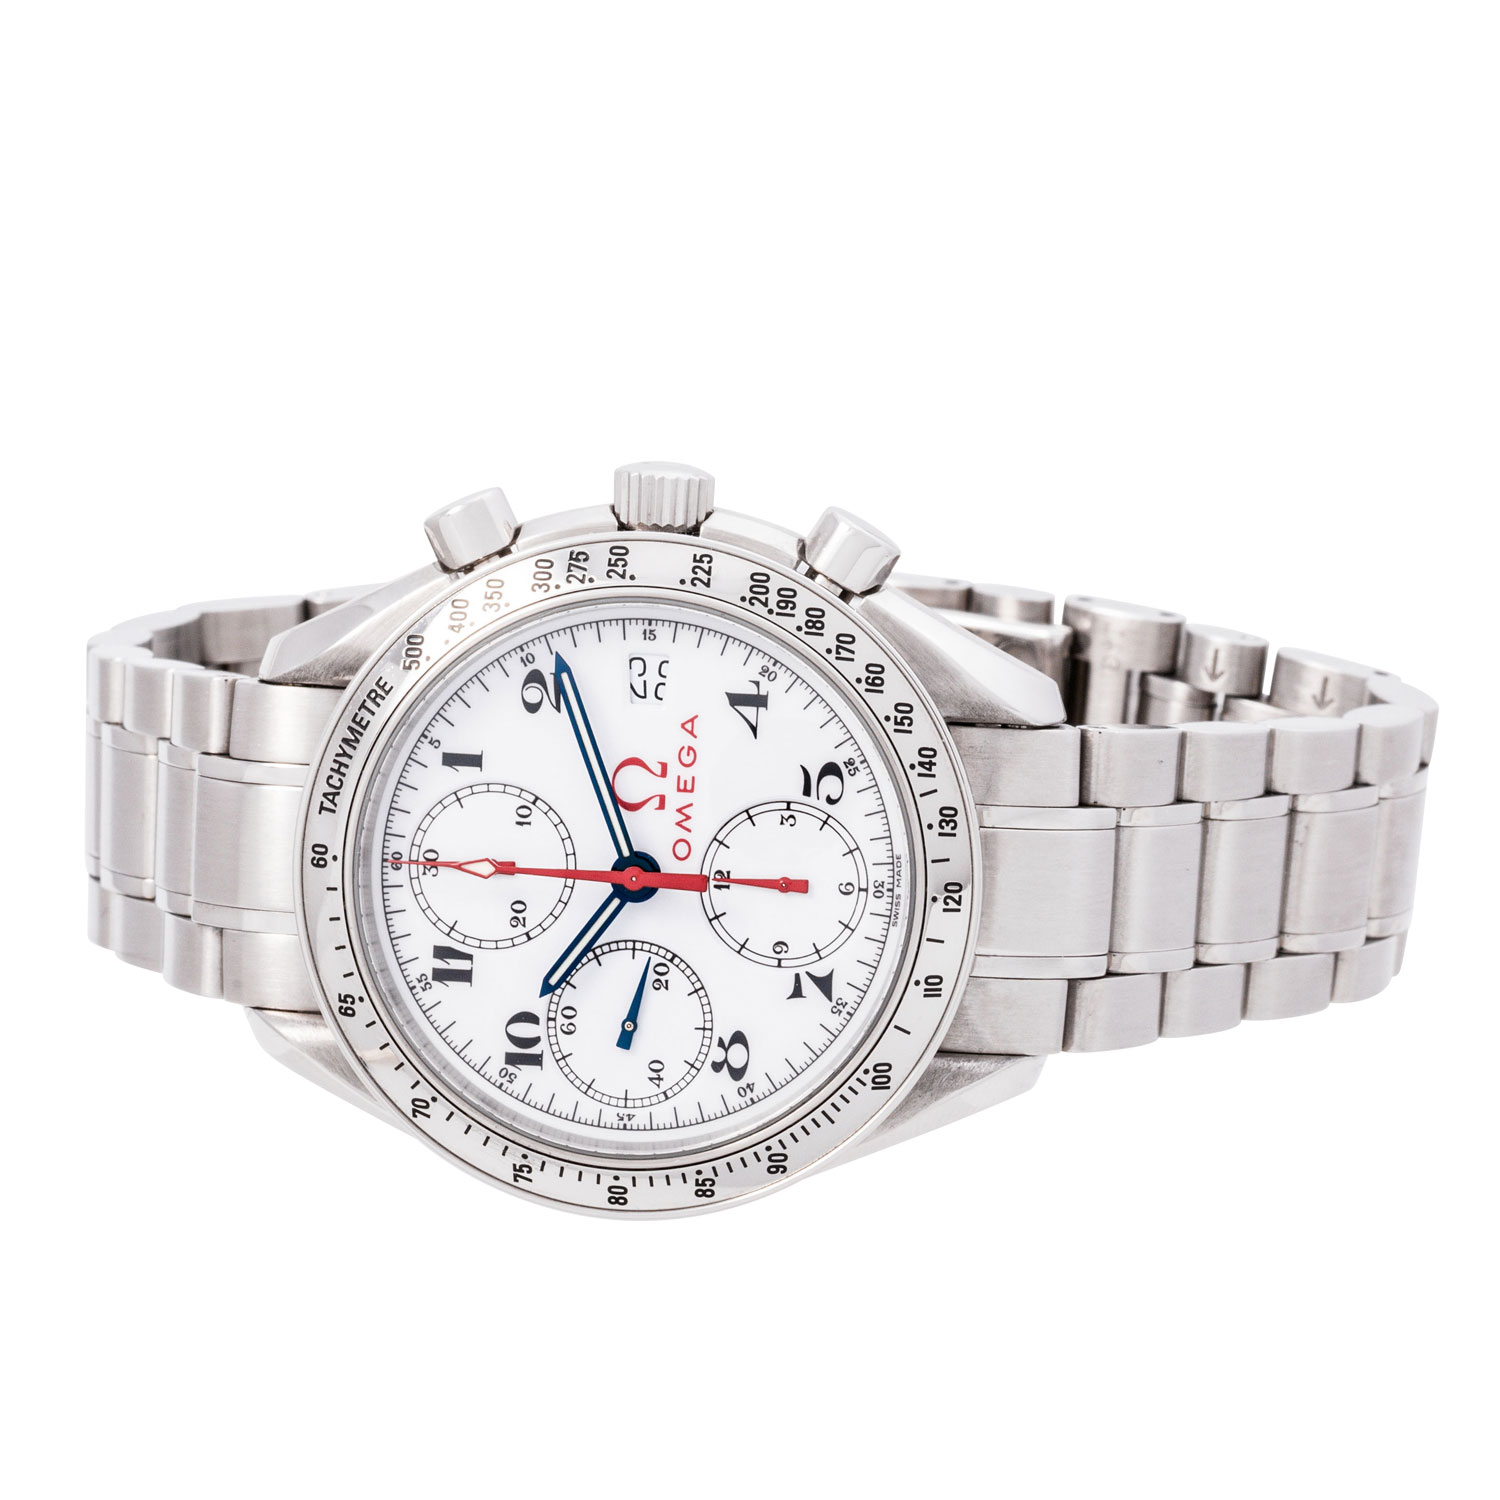 OMEGA Speedmaster Date "Olympic Collection" Herren Chronograph, Ref. 3513.20.00. - Image 6 of 8